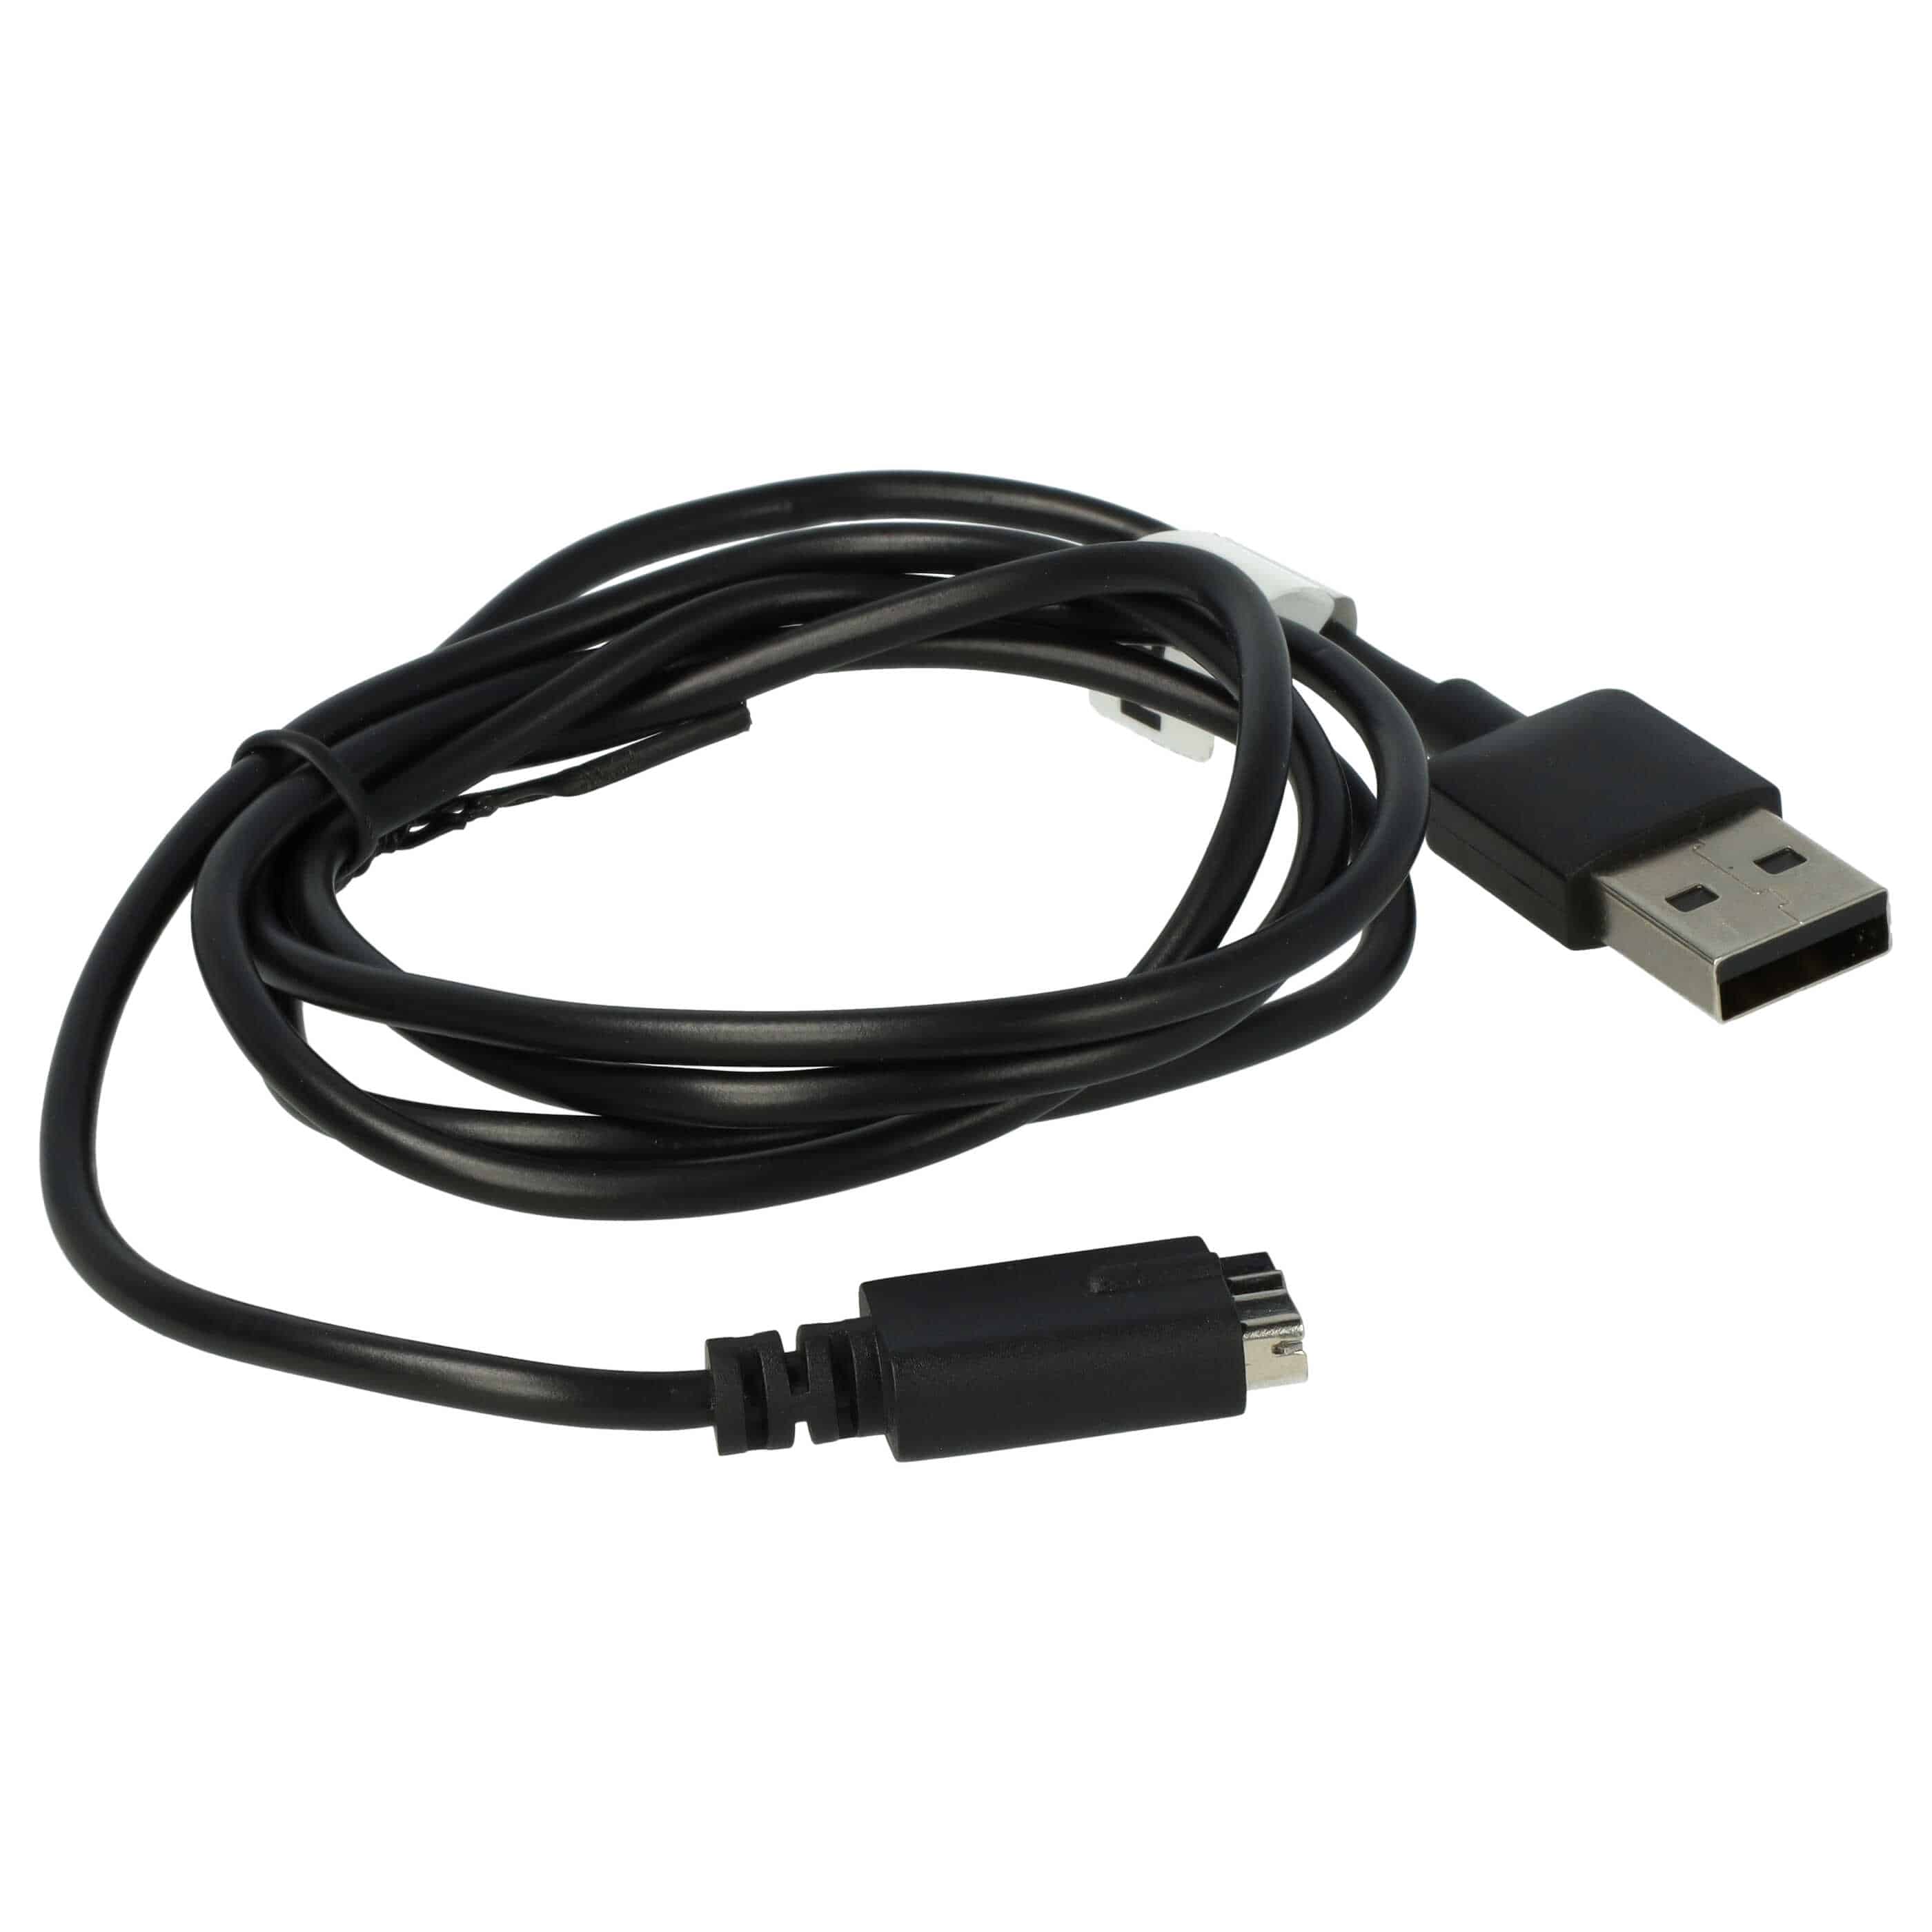 Charging Cable suitable for Polar M430 Fitness Tracker - USB A Cable, 100cm, black